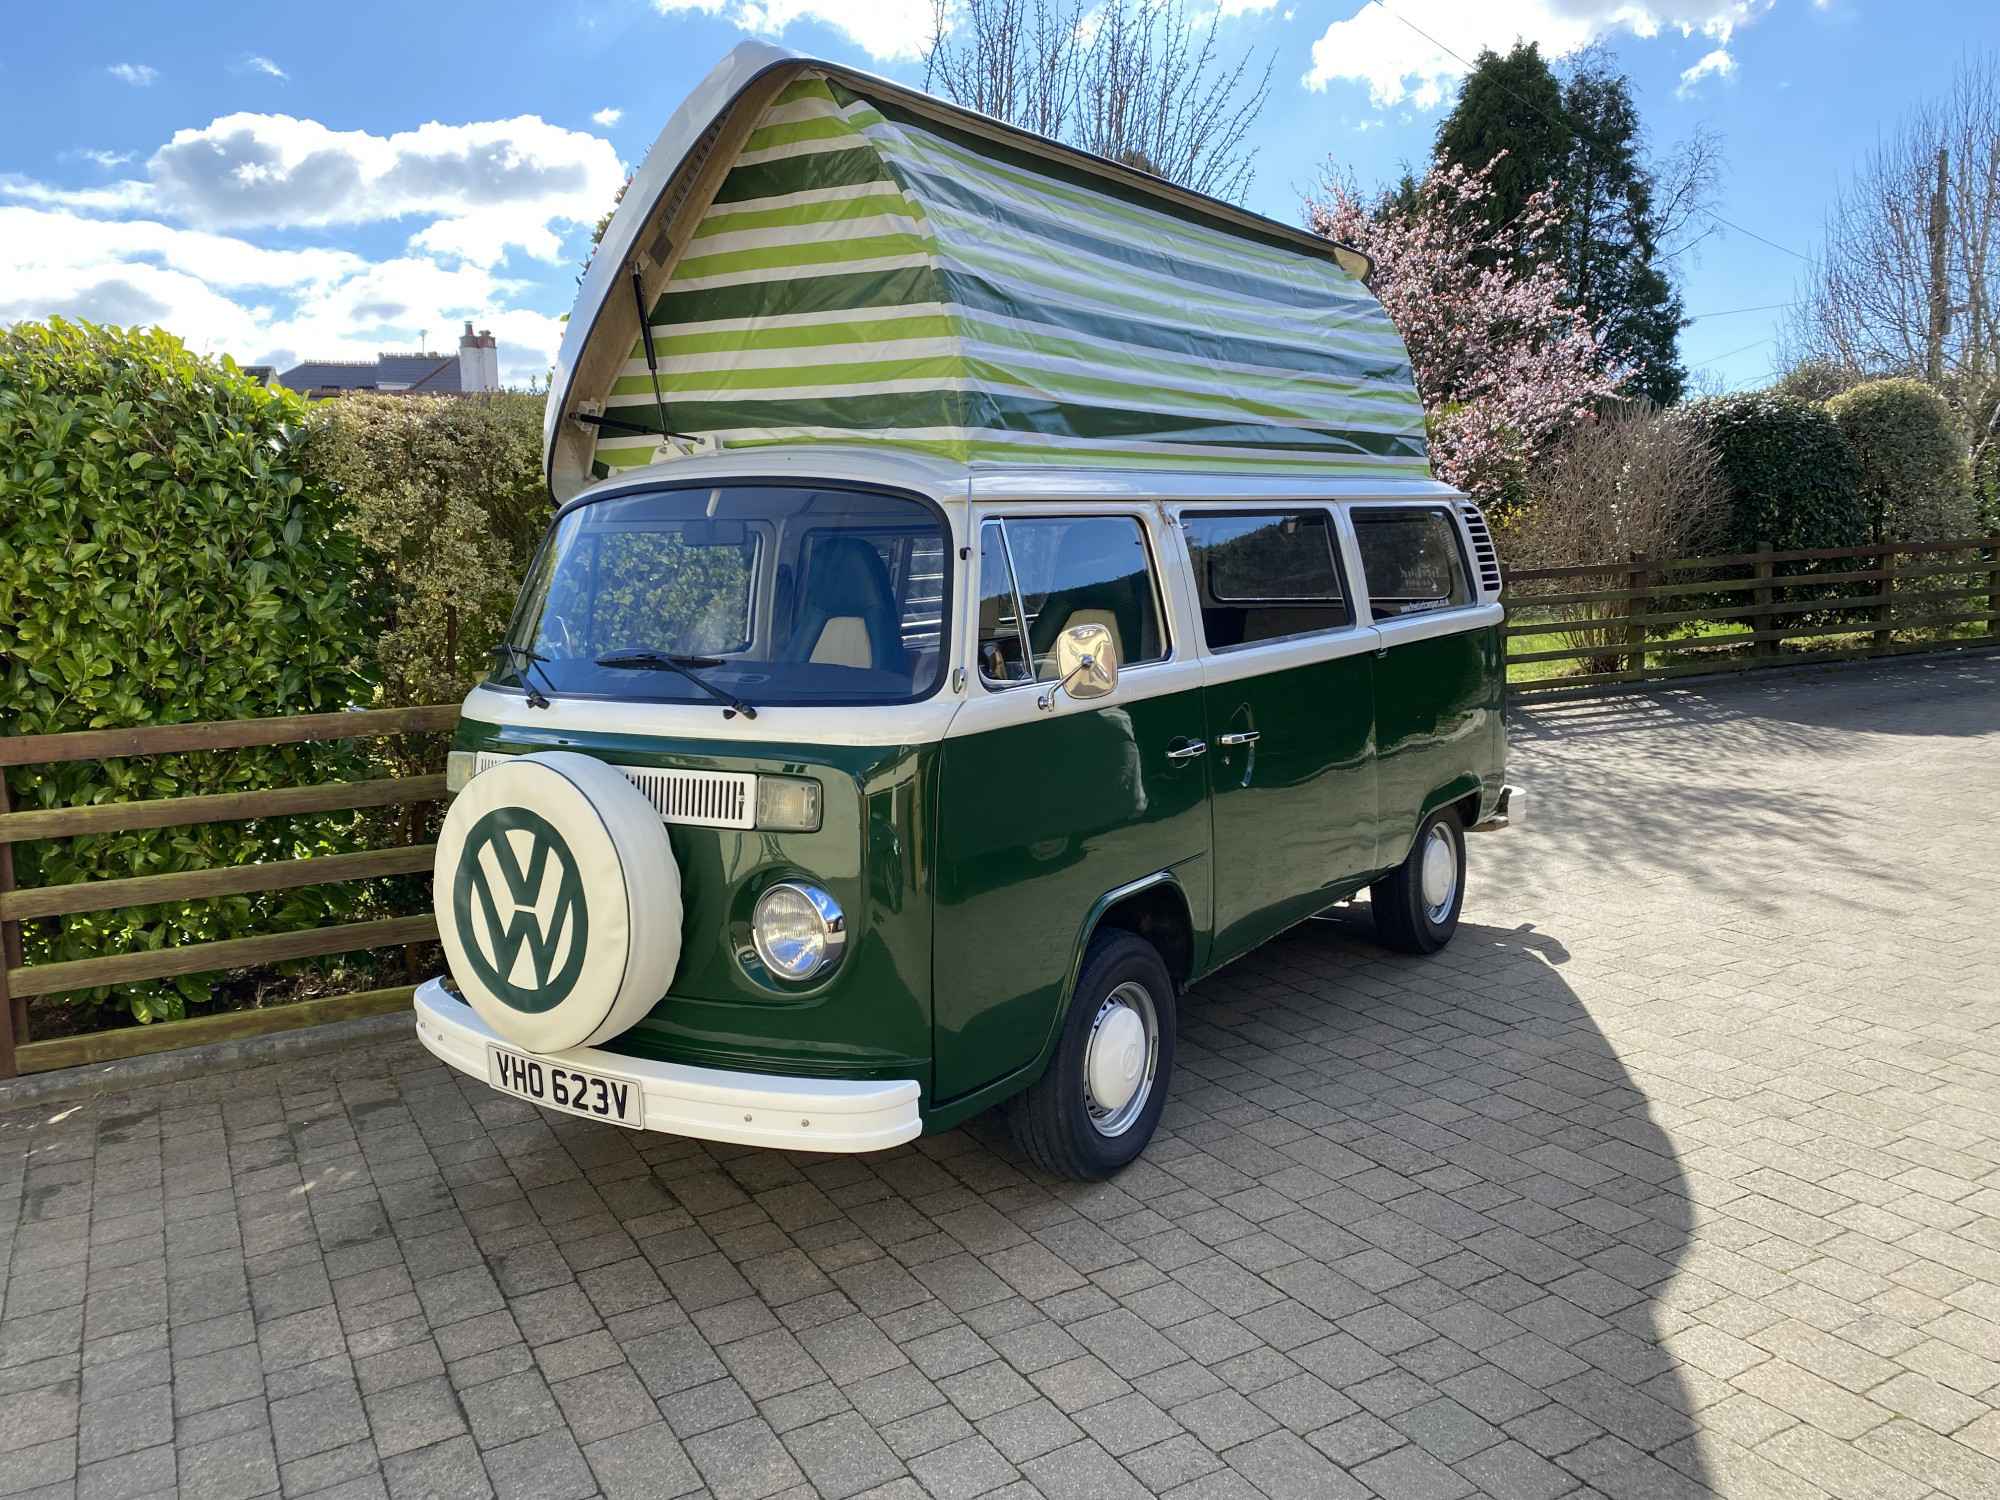 A VW T2 Classic Campervan called Wild-Monty and Wild Monty Campervan for hire for hire in Colyford, England